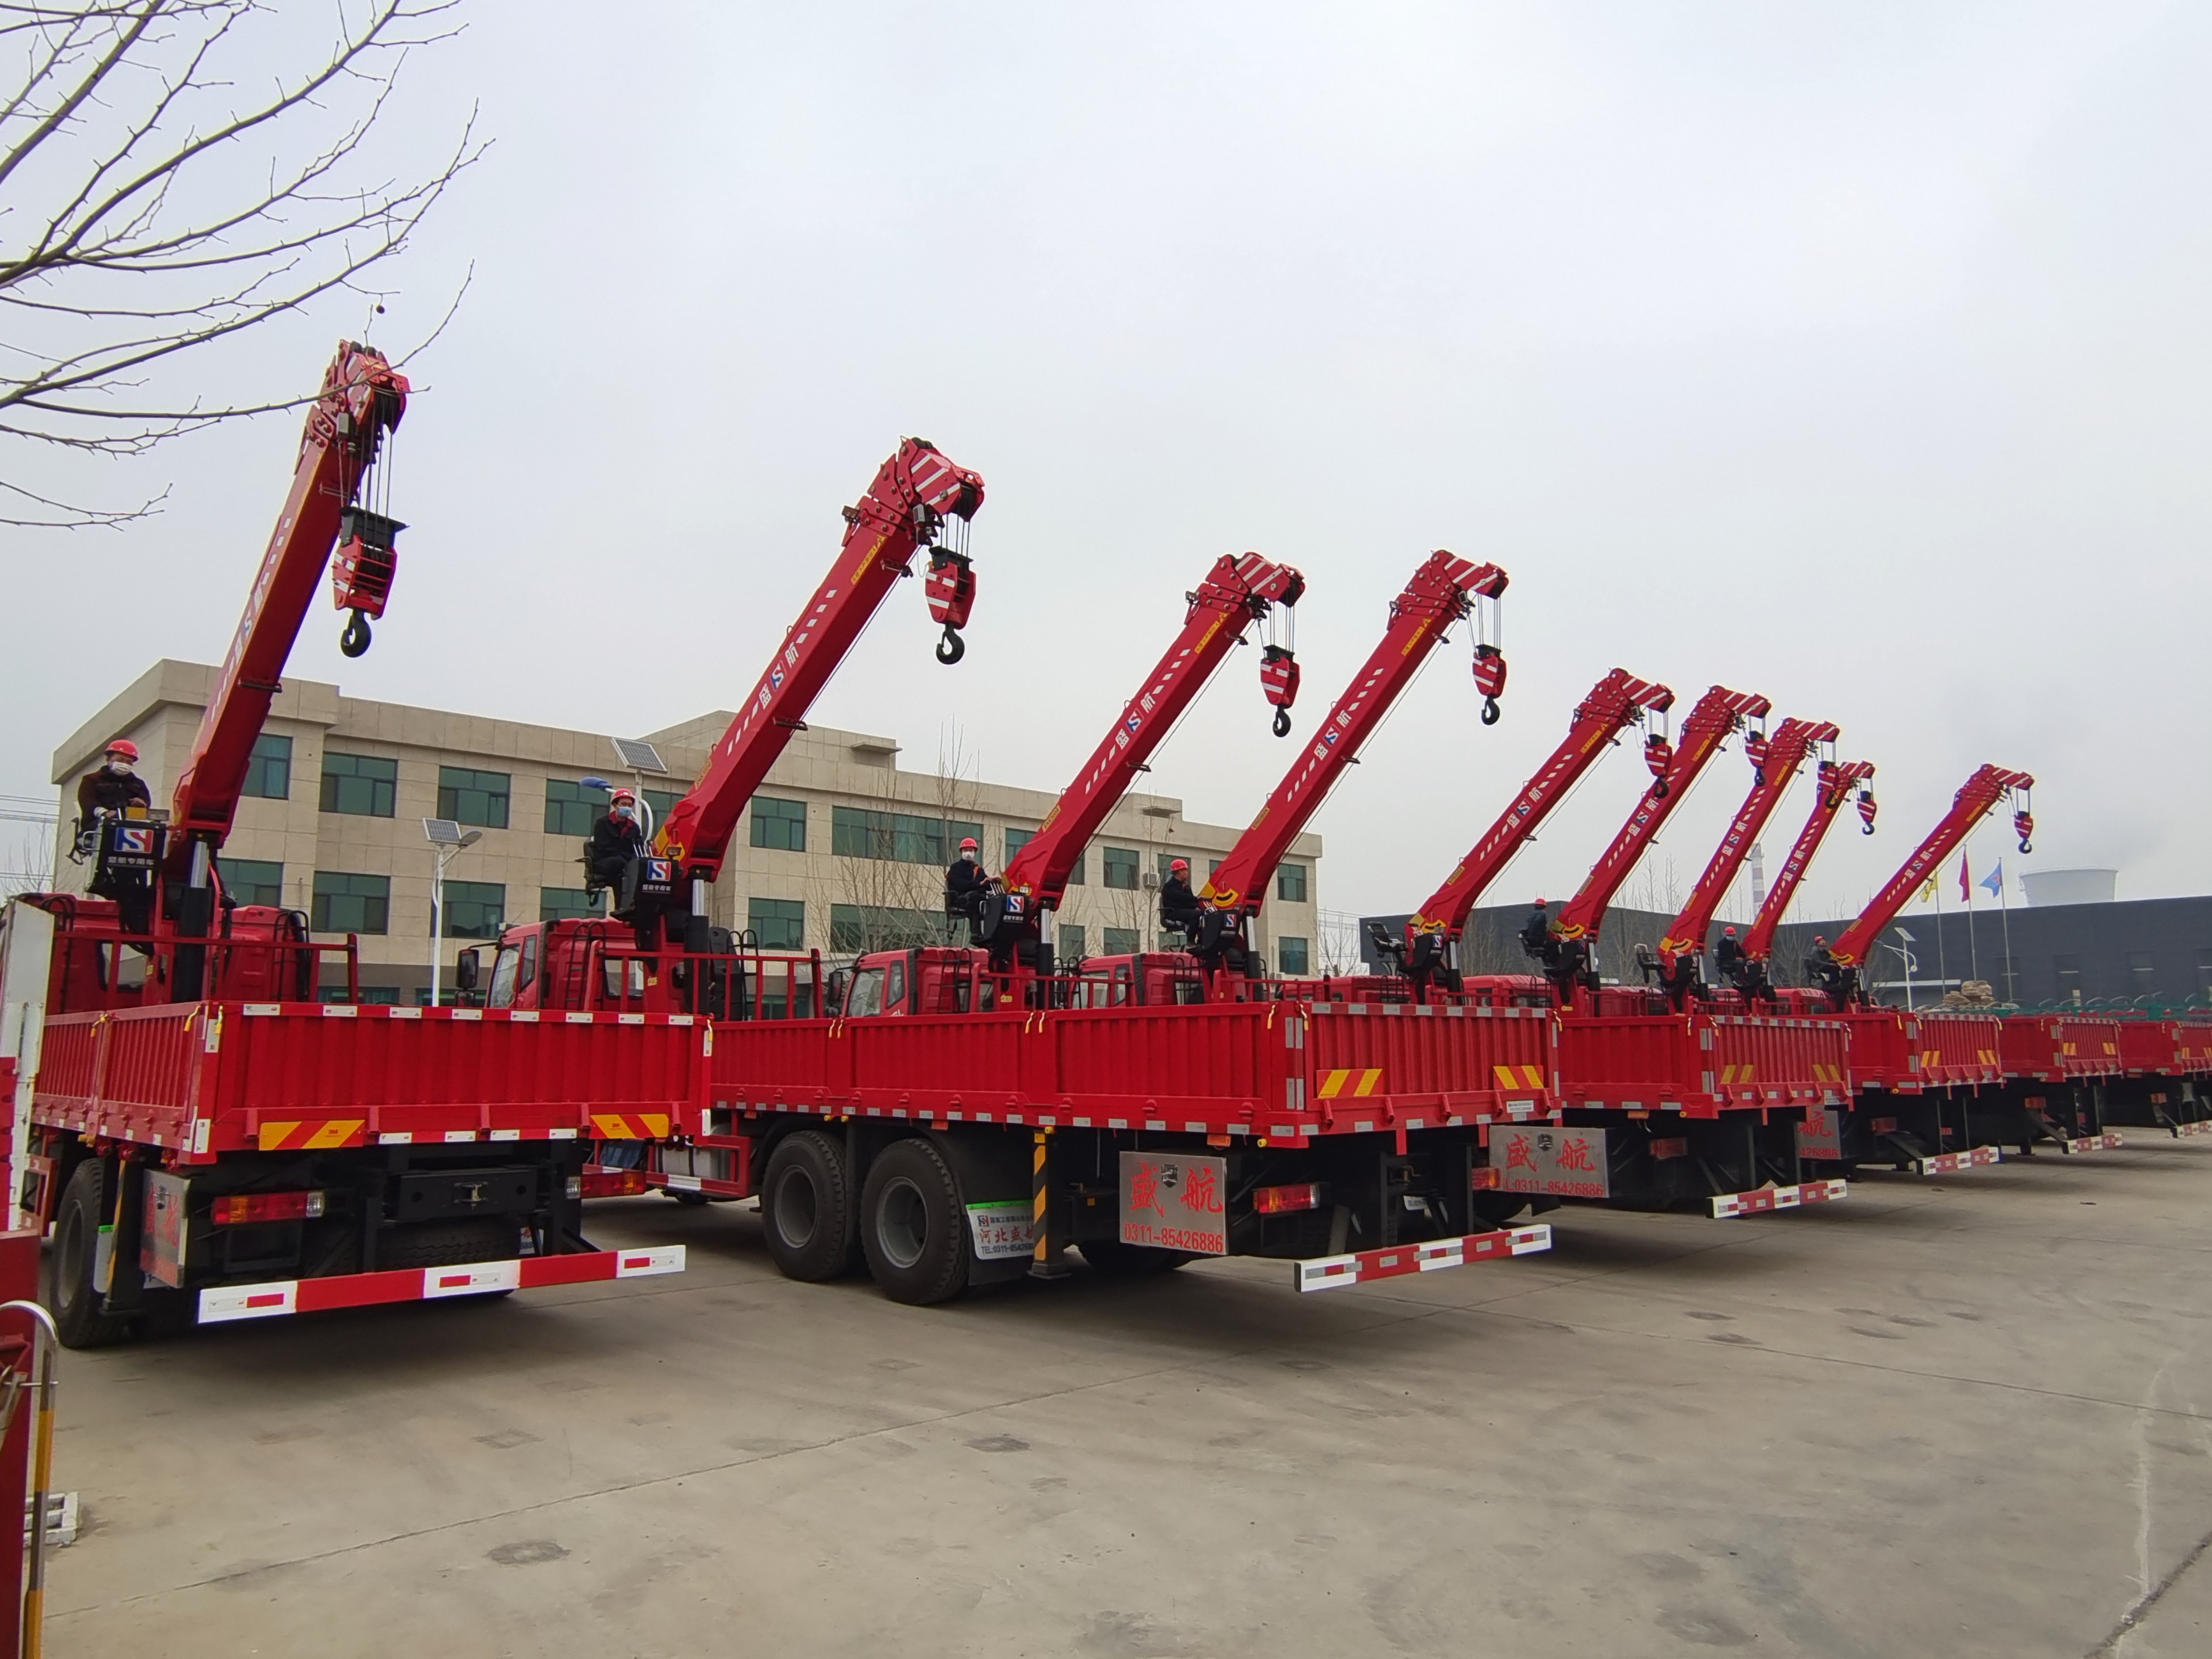 Do you know the various parts of the truck crane?